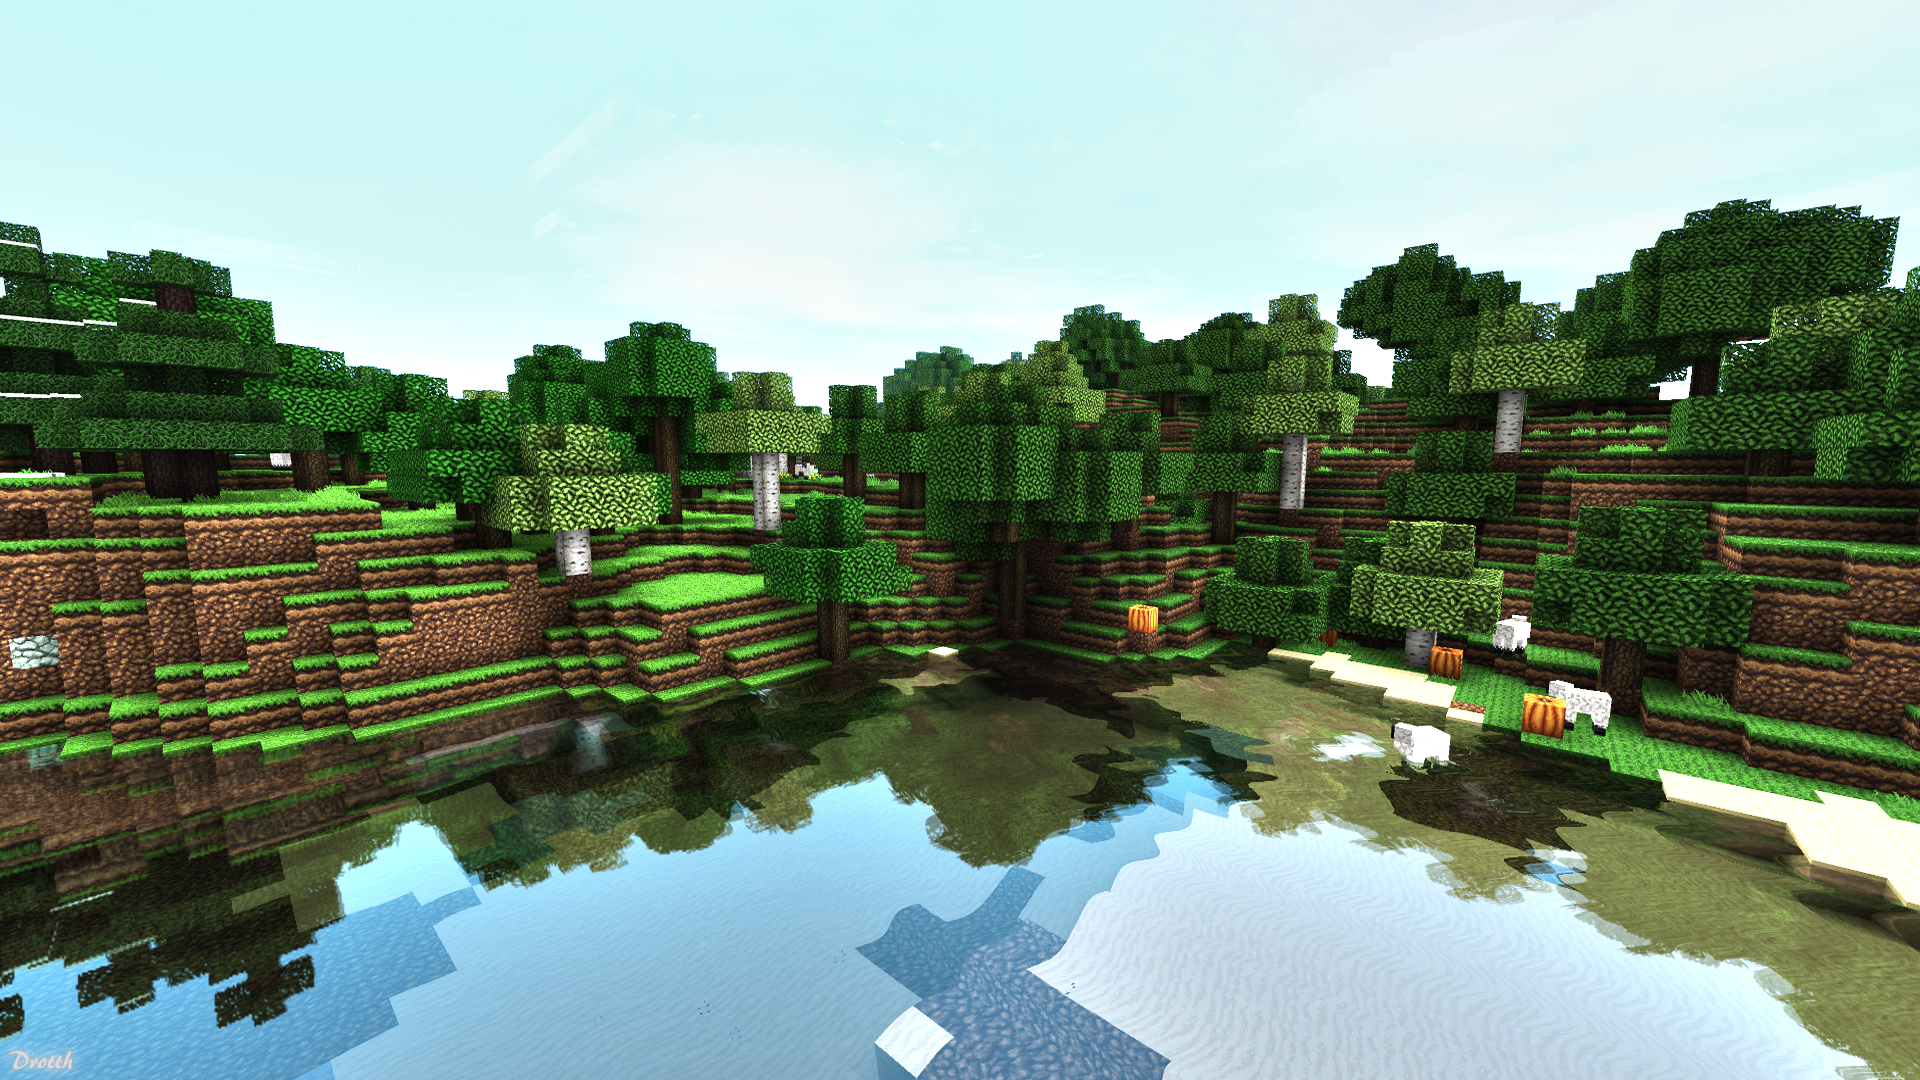 Minecraft Shaders Fire HD Minecraft Wallpapers  HD Wallpapers  ID 62883